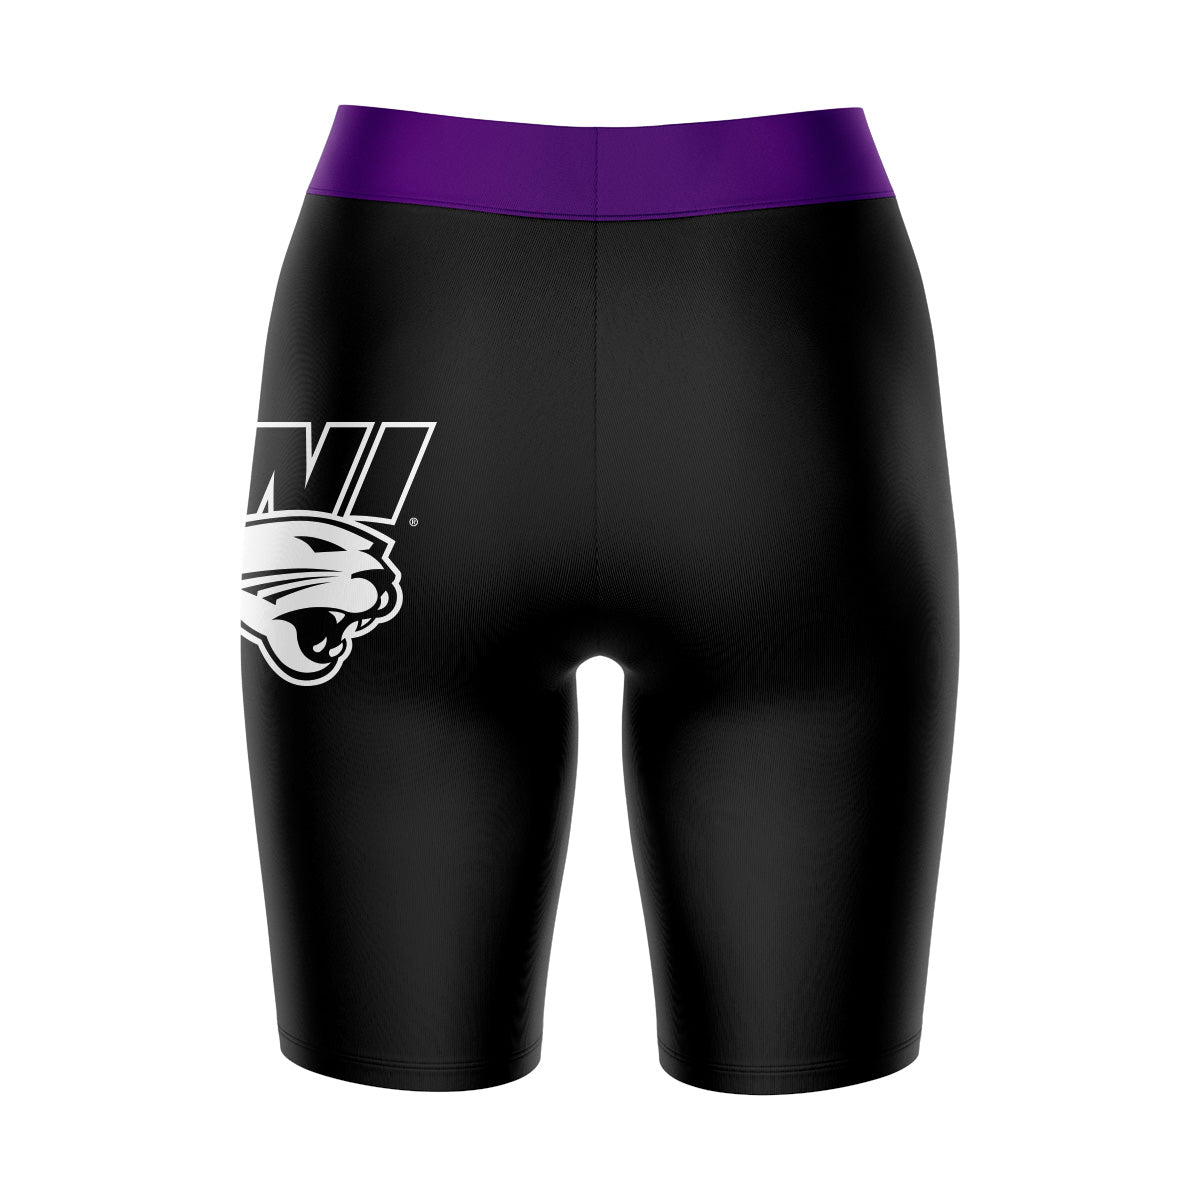 Northern Iowa Panthers Vive La Fete Game Day Logo on Thigh and Waistband Black and Purple Women Bike Short 9 Inseam"